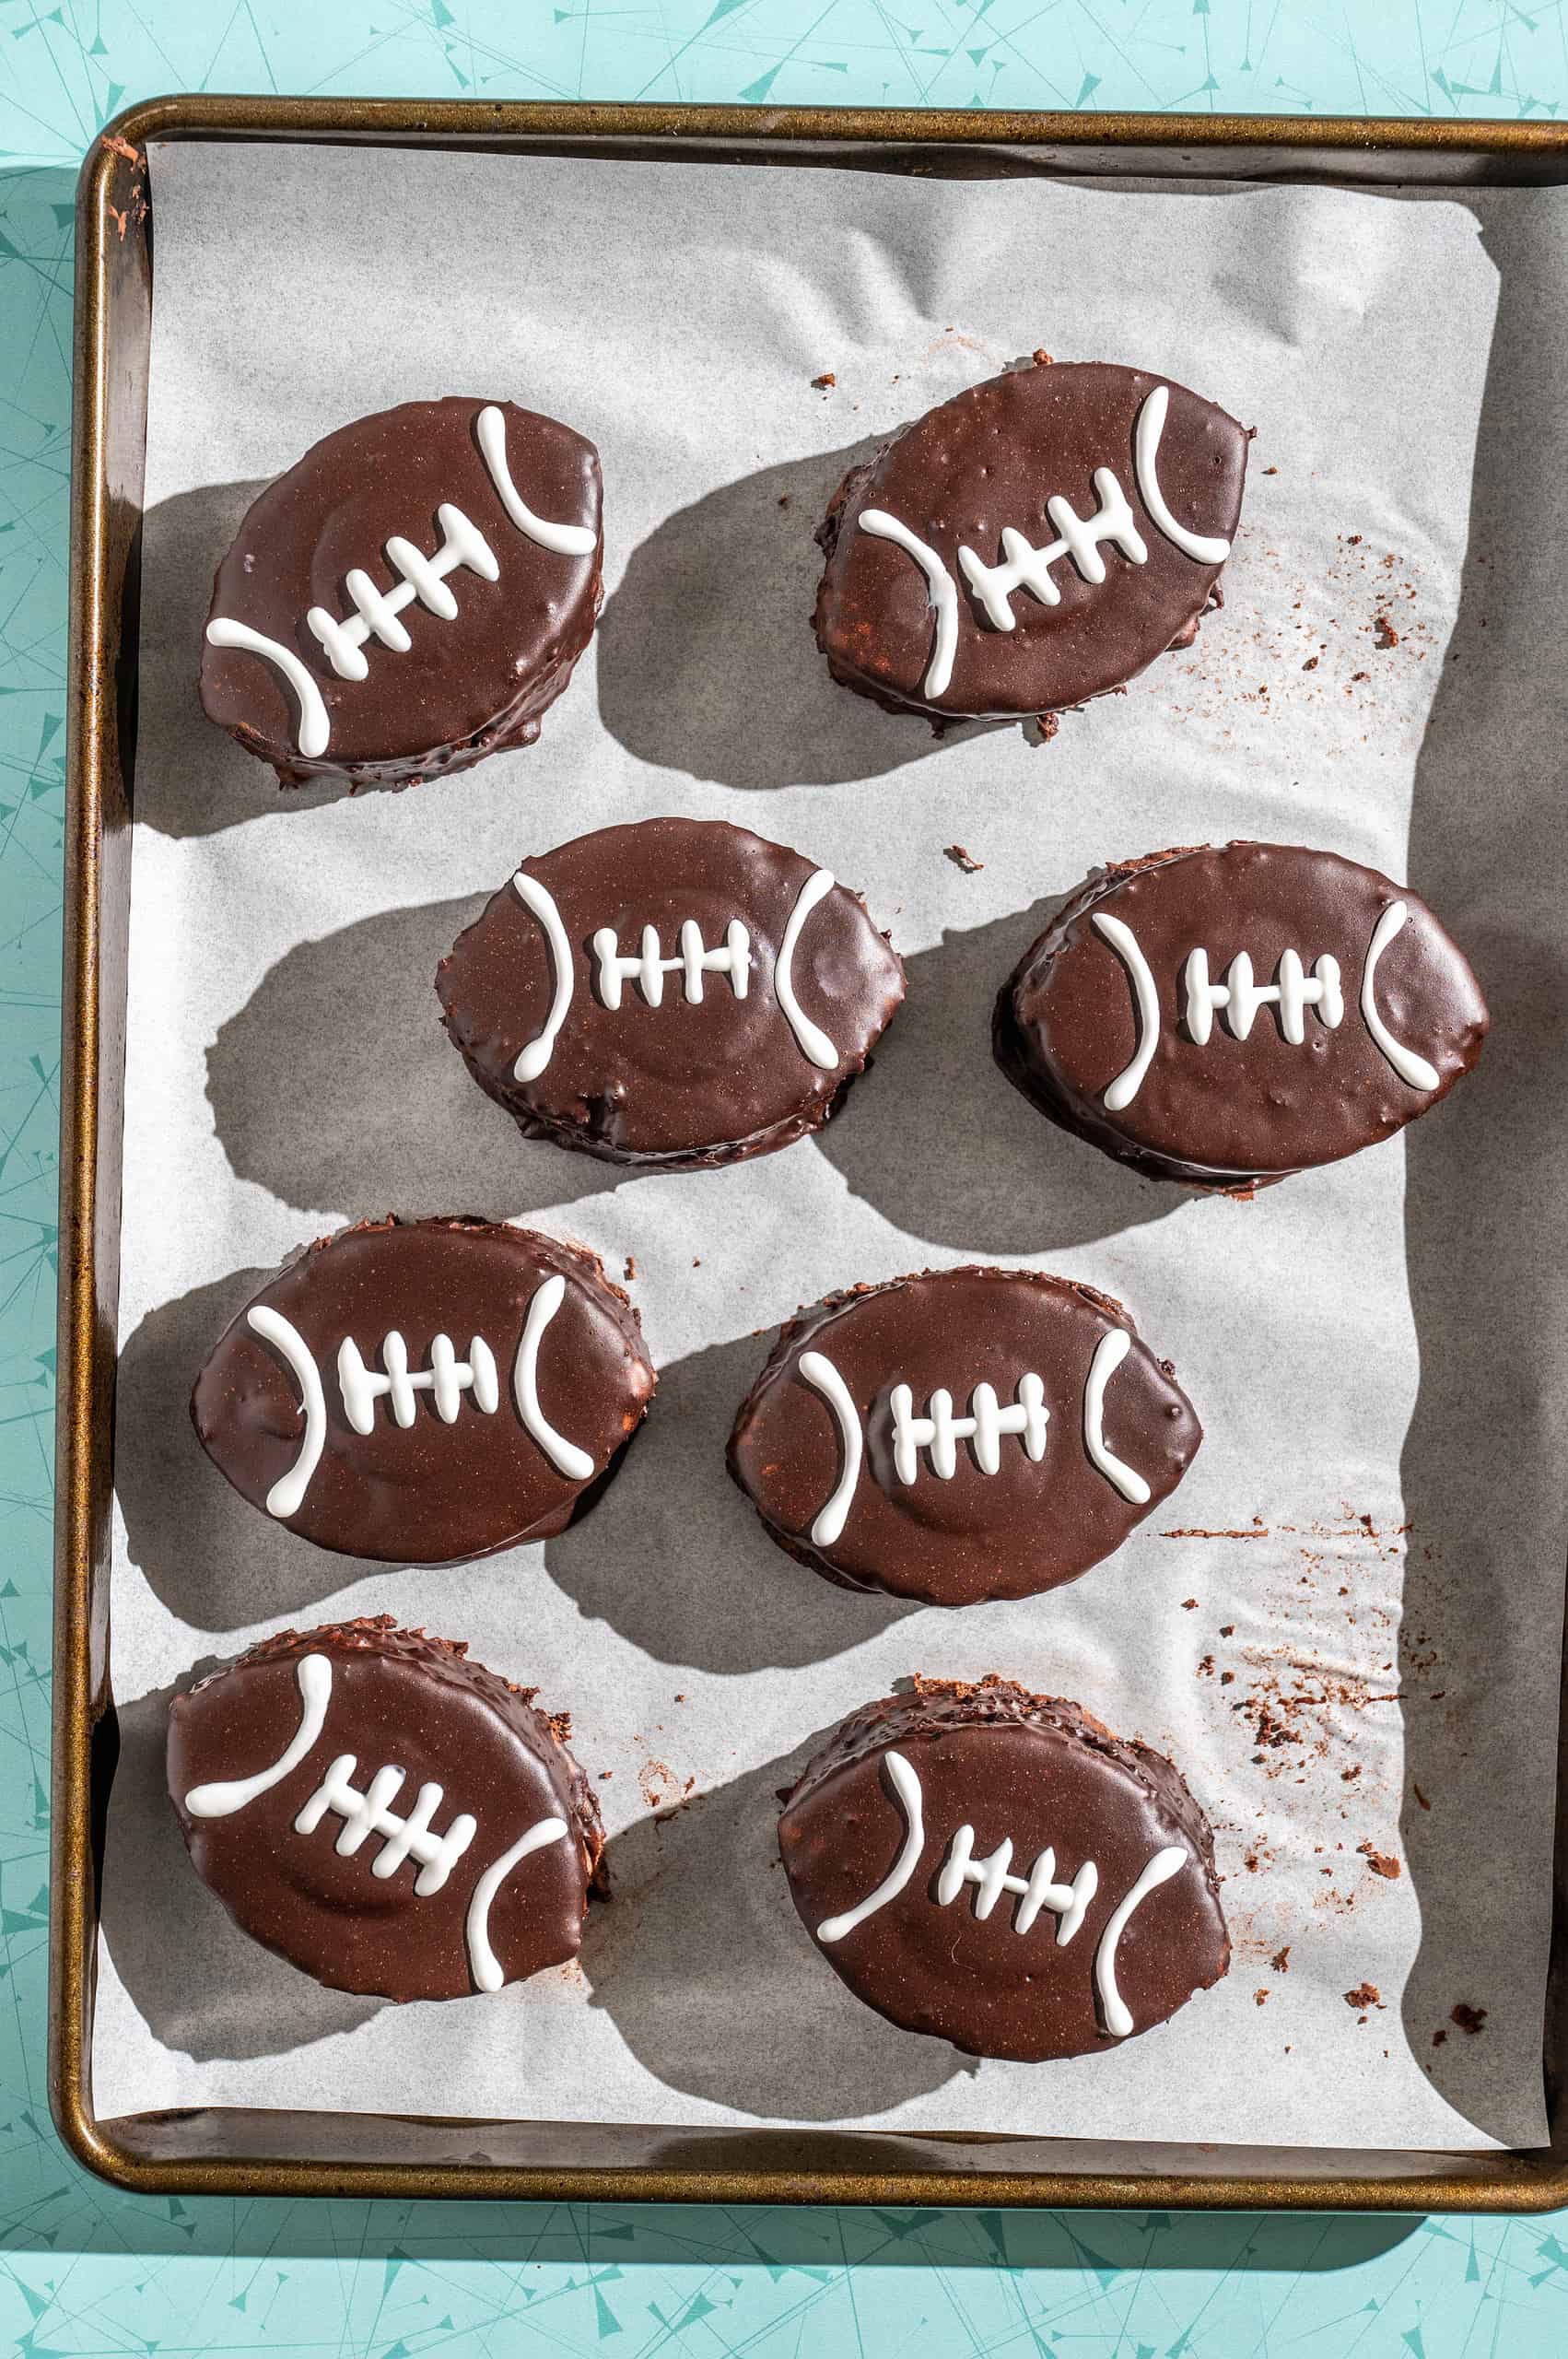 8 mini chocolate football cakes on a tray after decorating with white icing